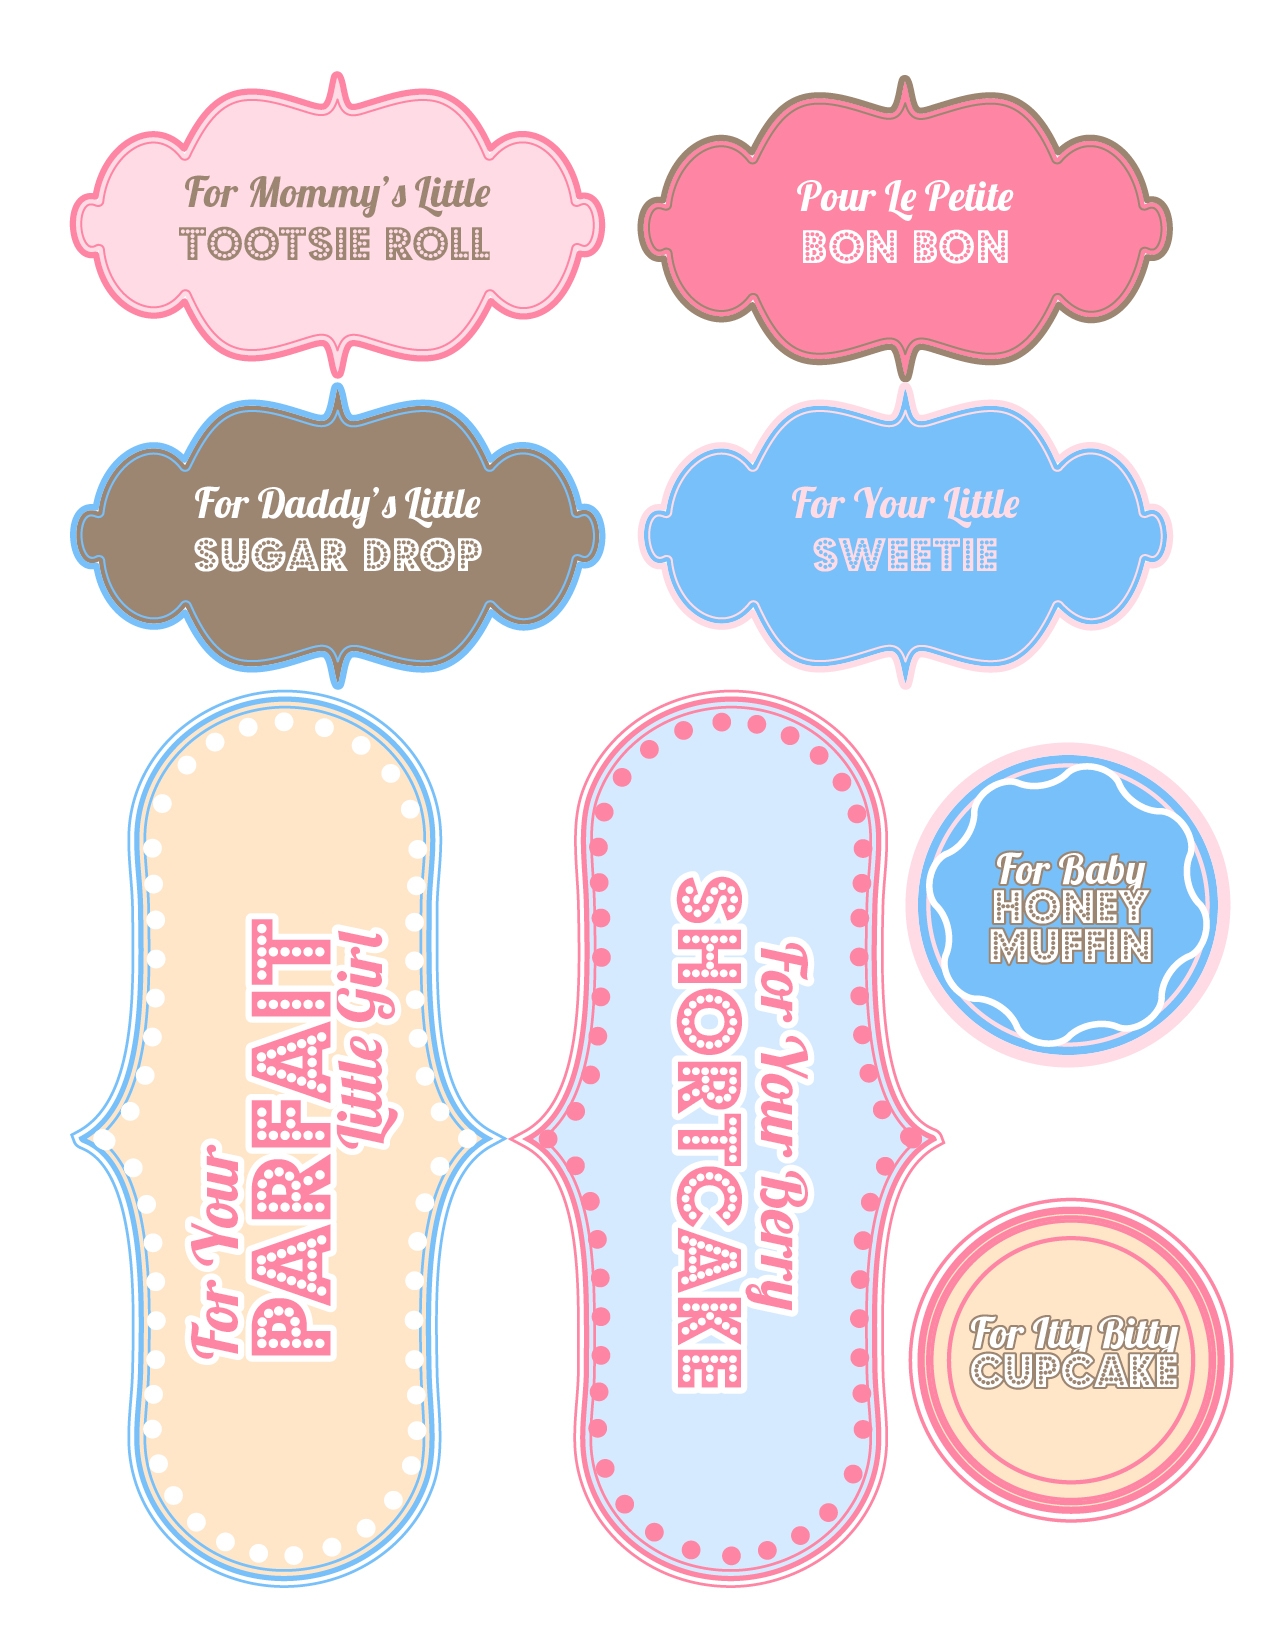 Baby Shower Gifts Free Printable Sweet Anne Designs - Free Printable Baby Shower Favor Tags Template